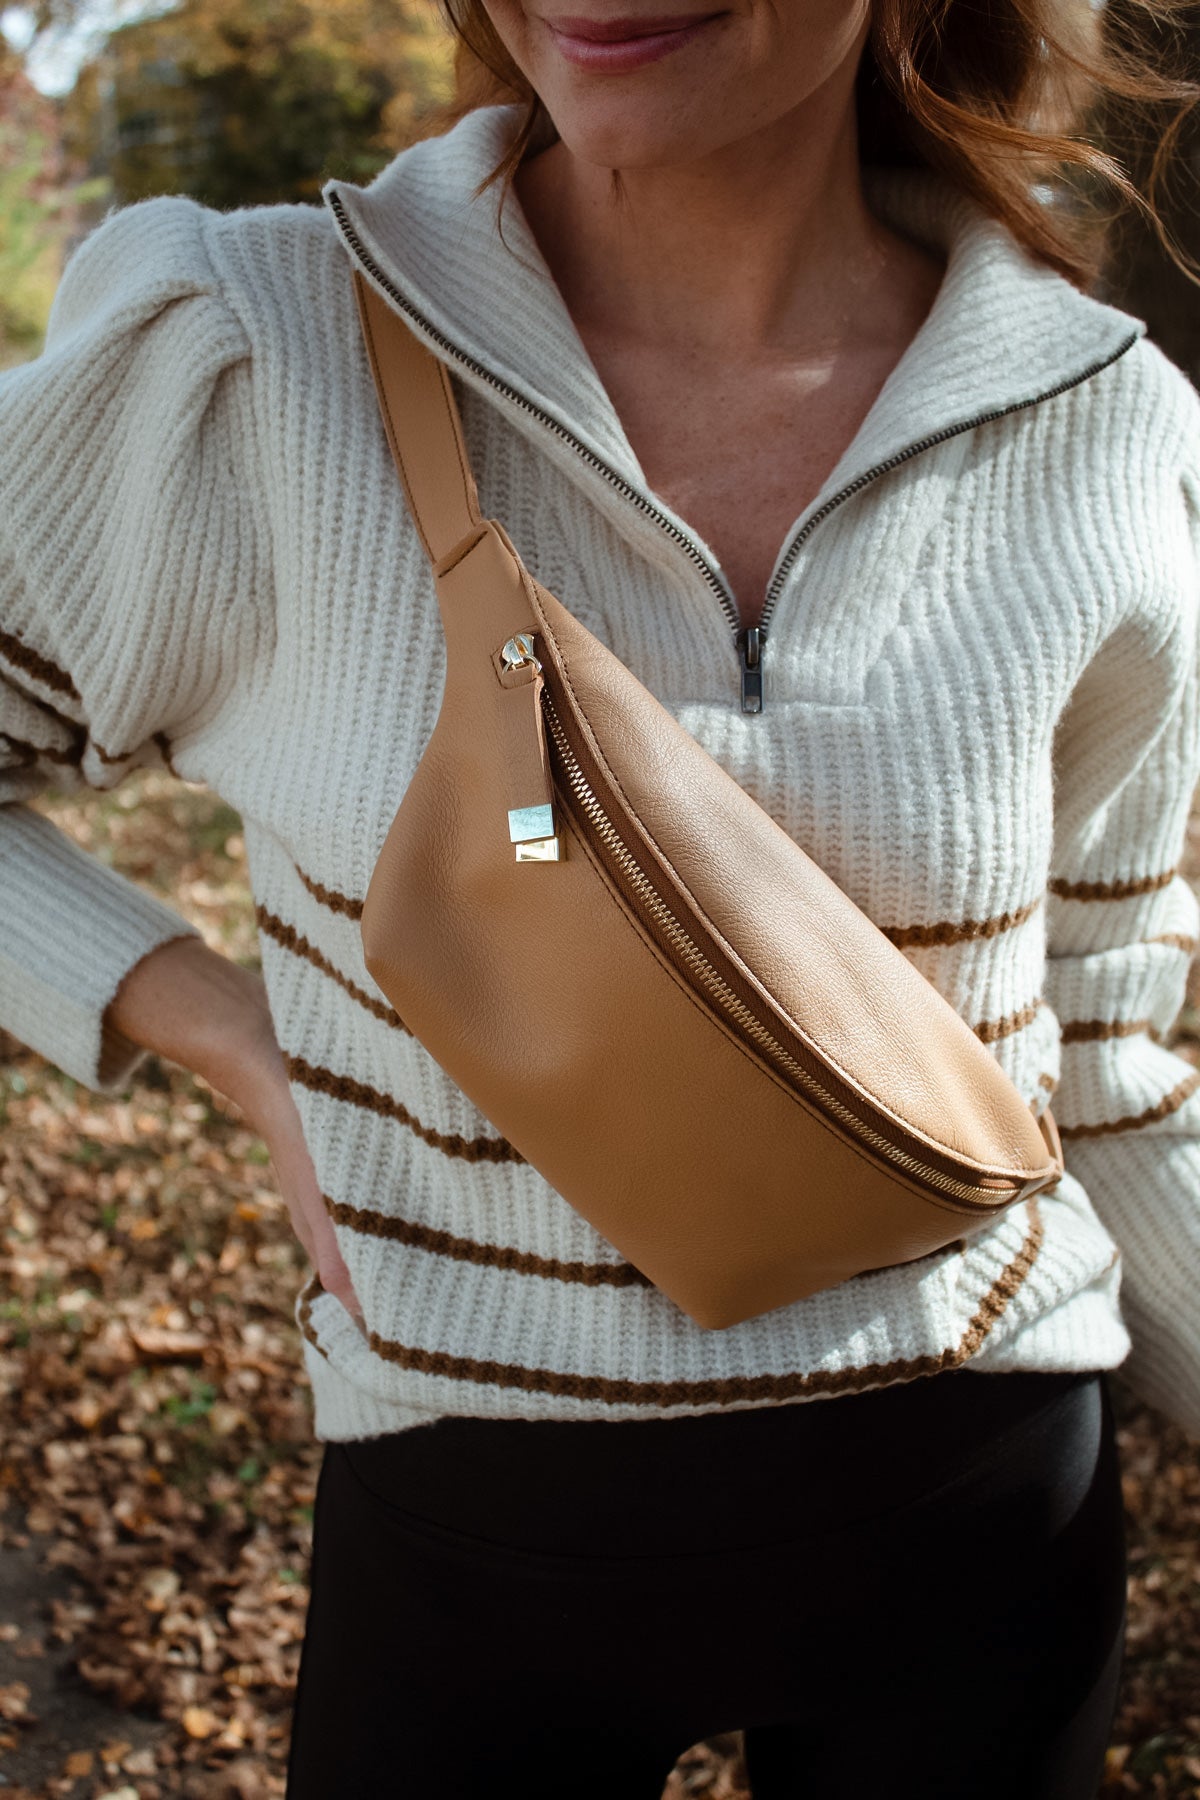 FANNY PACK | WHEAT